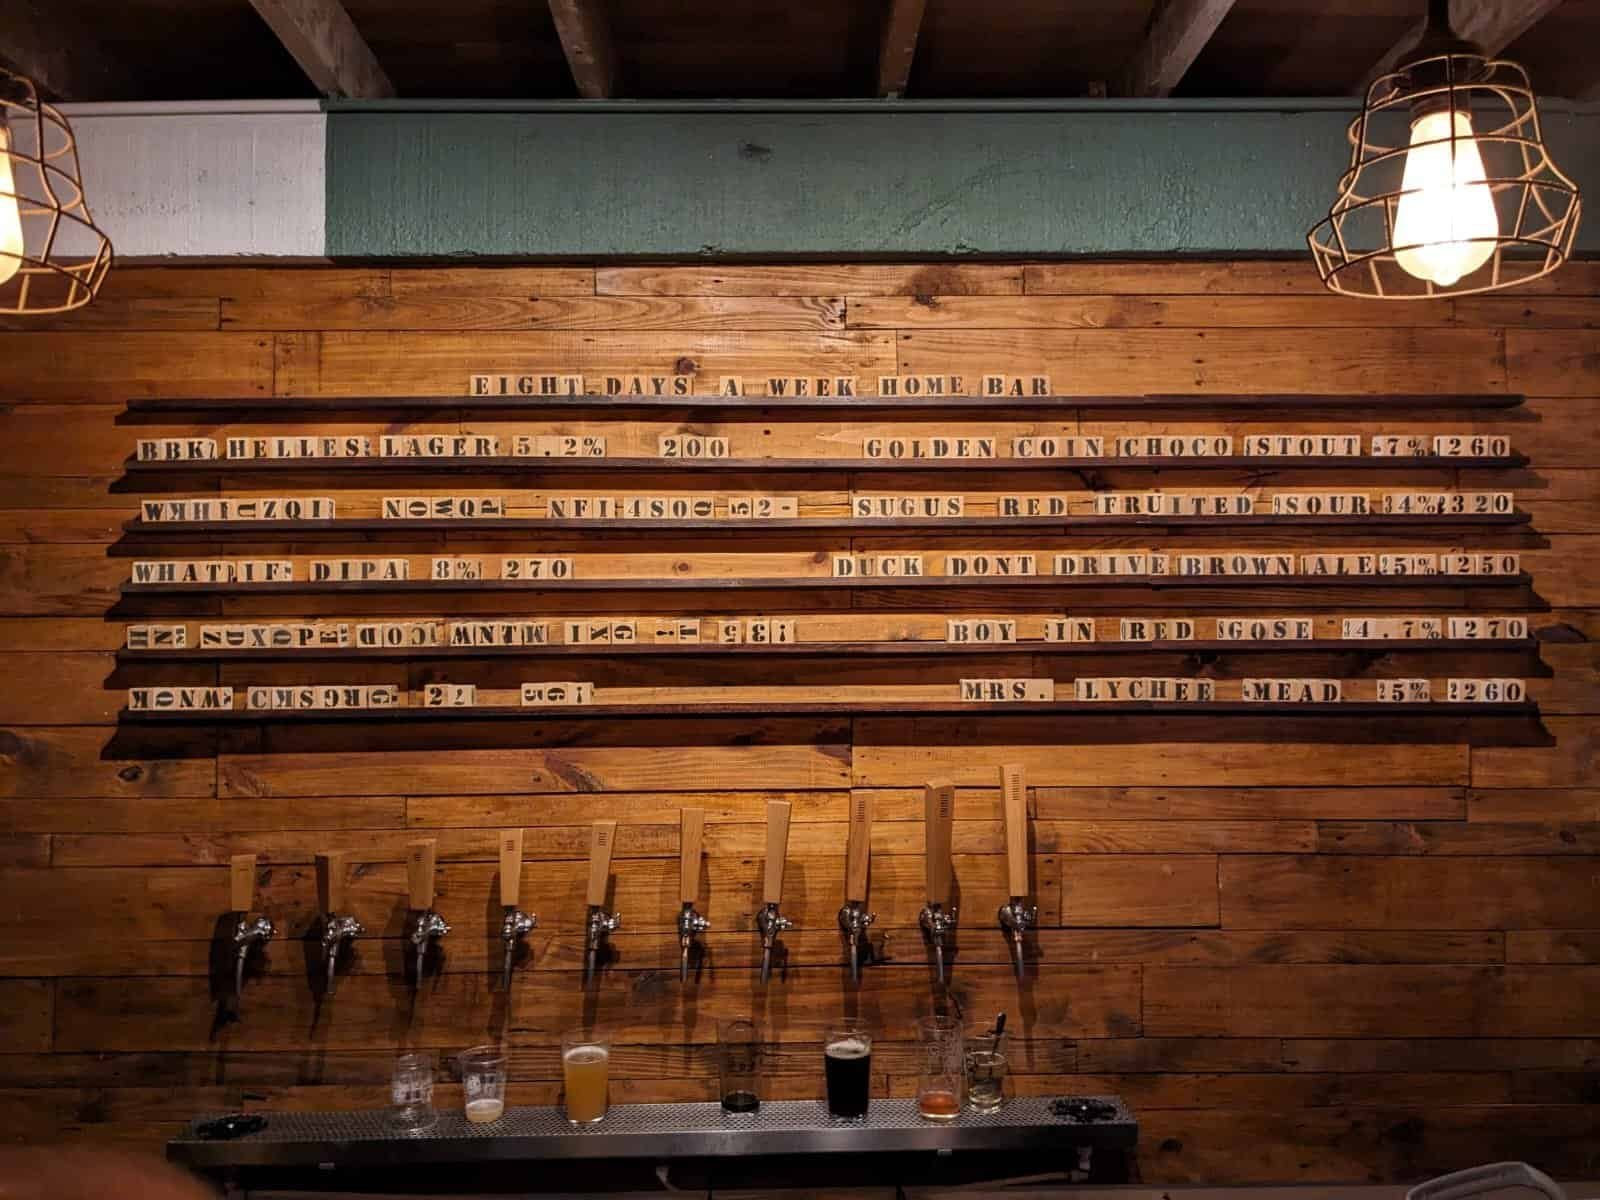 The tapwall of beers at Eight Days a Week Homebrew craft beer bar in Bangkok, Thailand. 